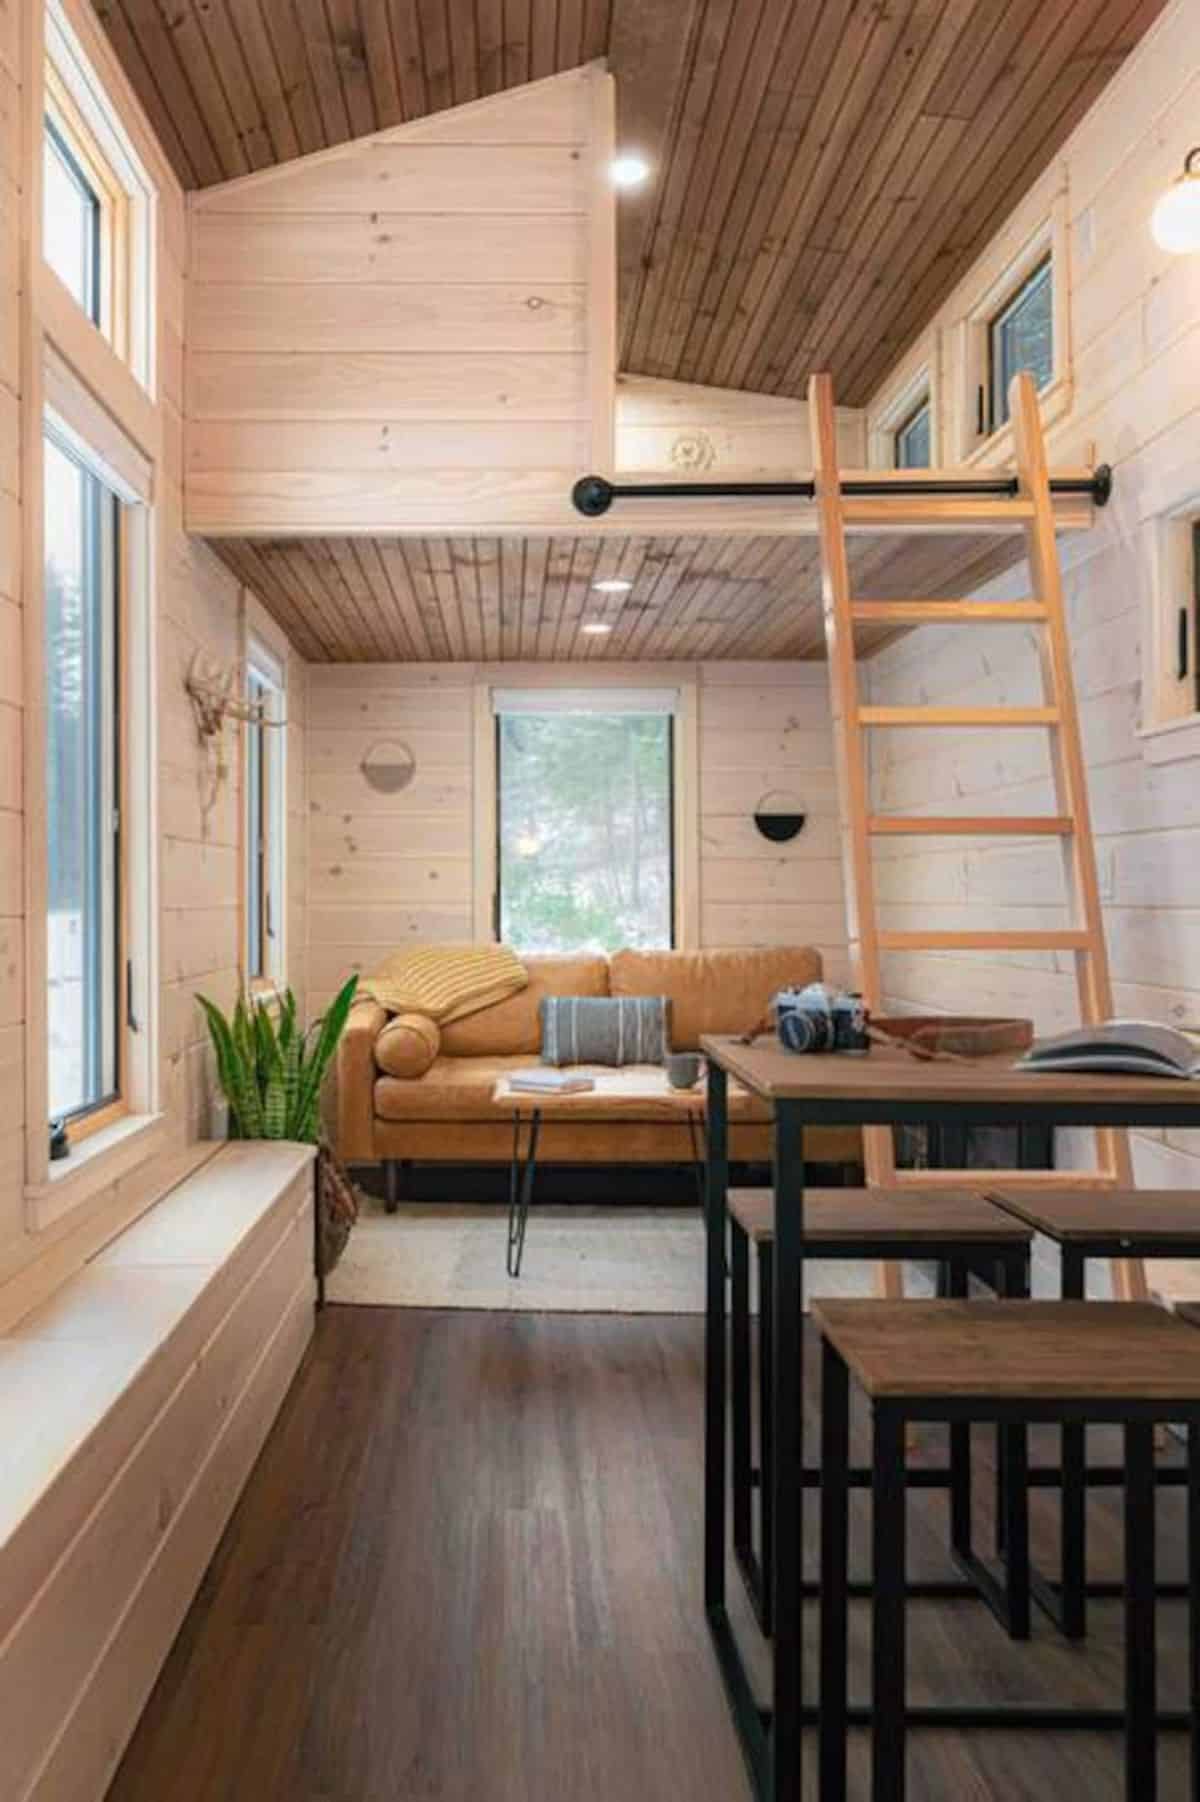 ladder to loft on right with sofa in background and table in foreground of tiny home